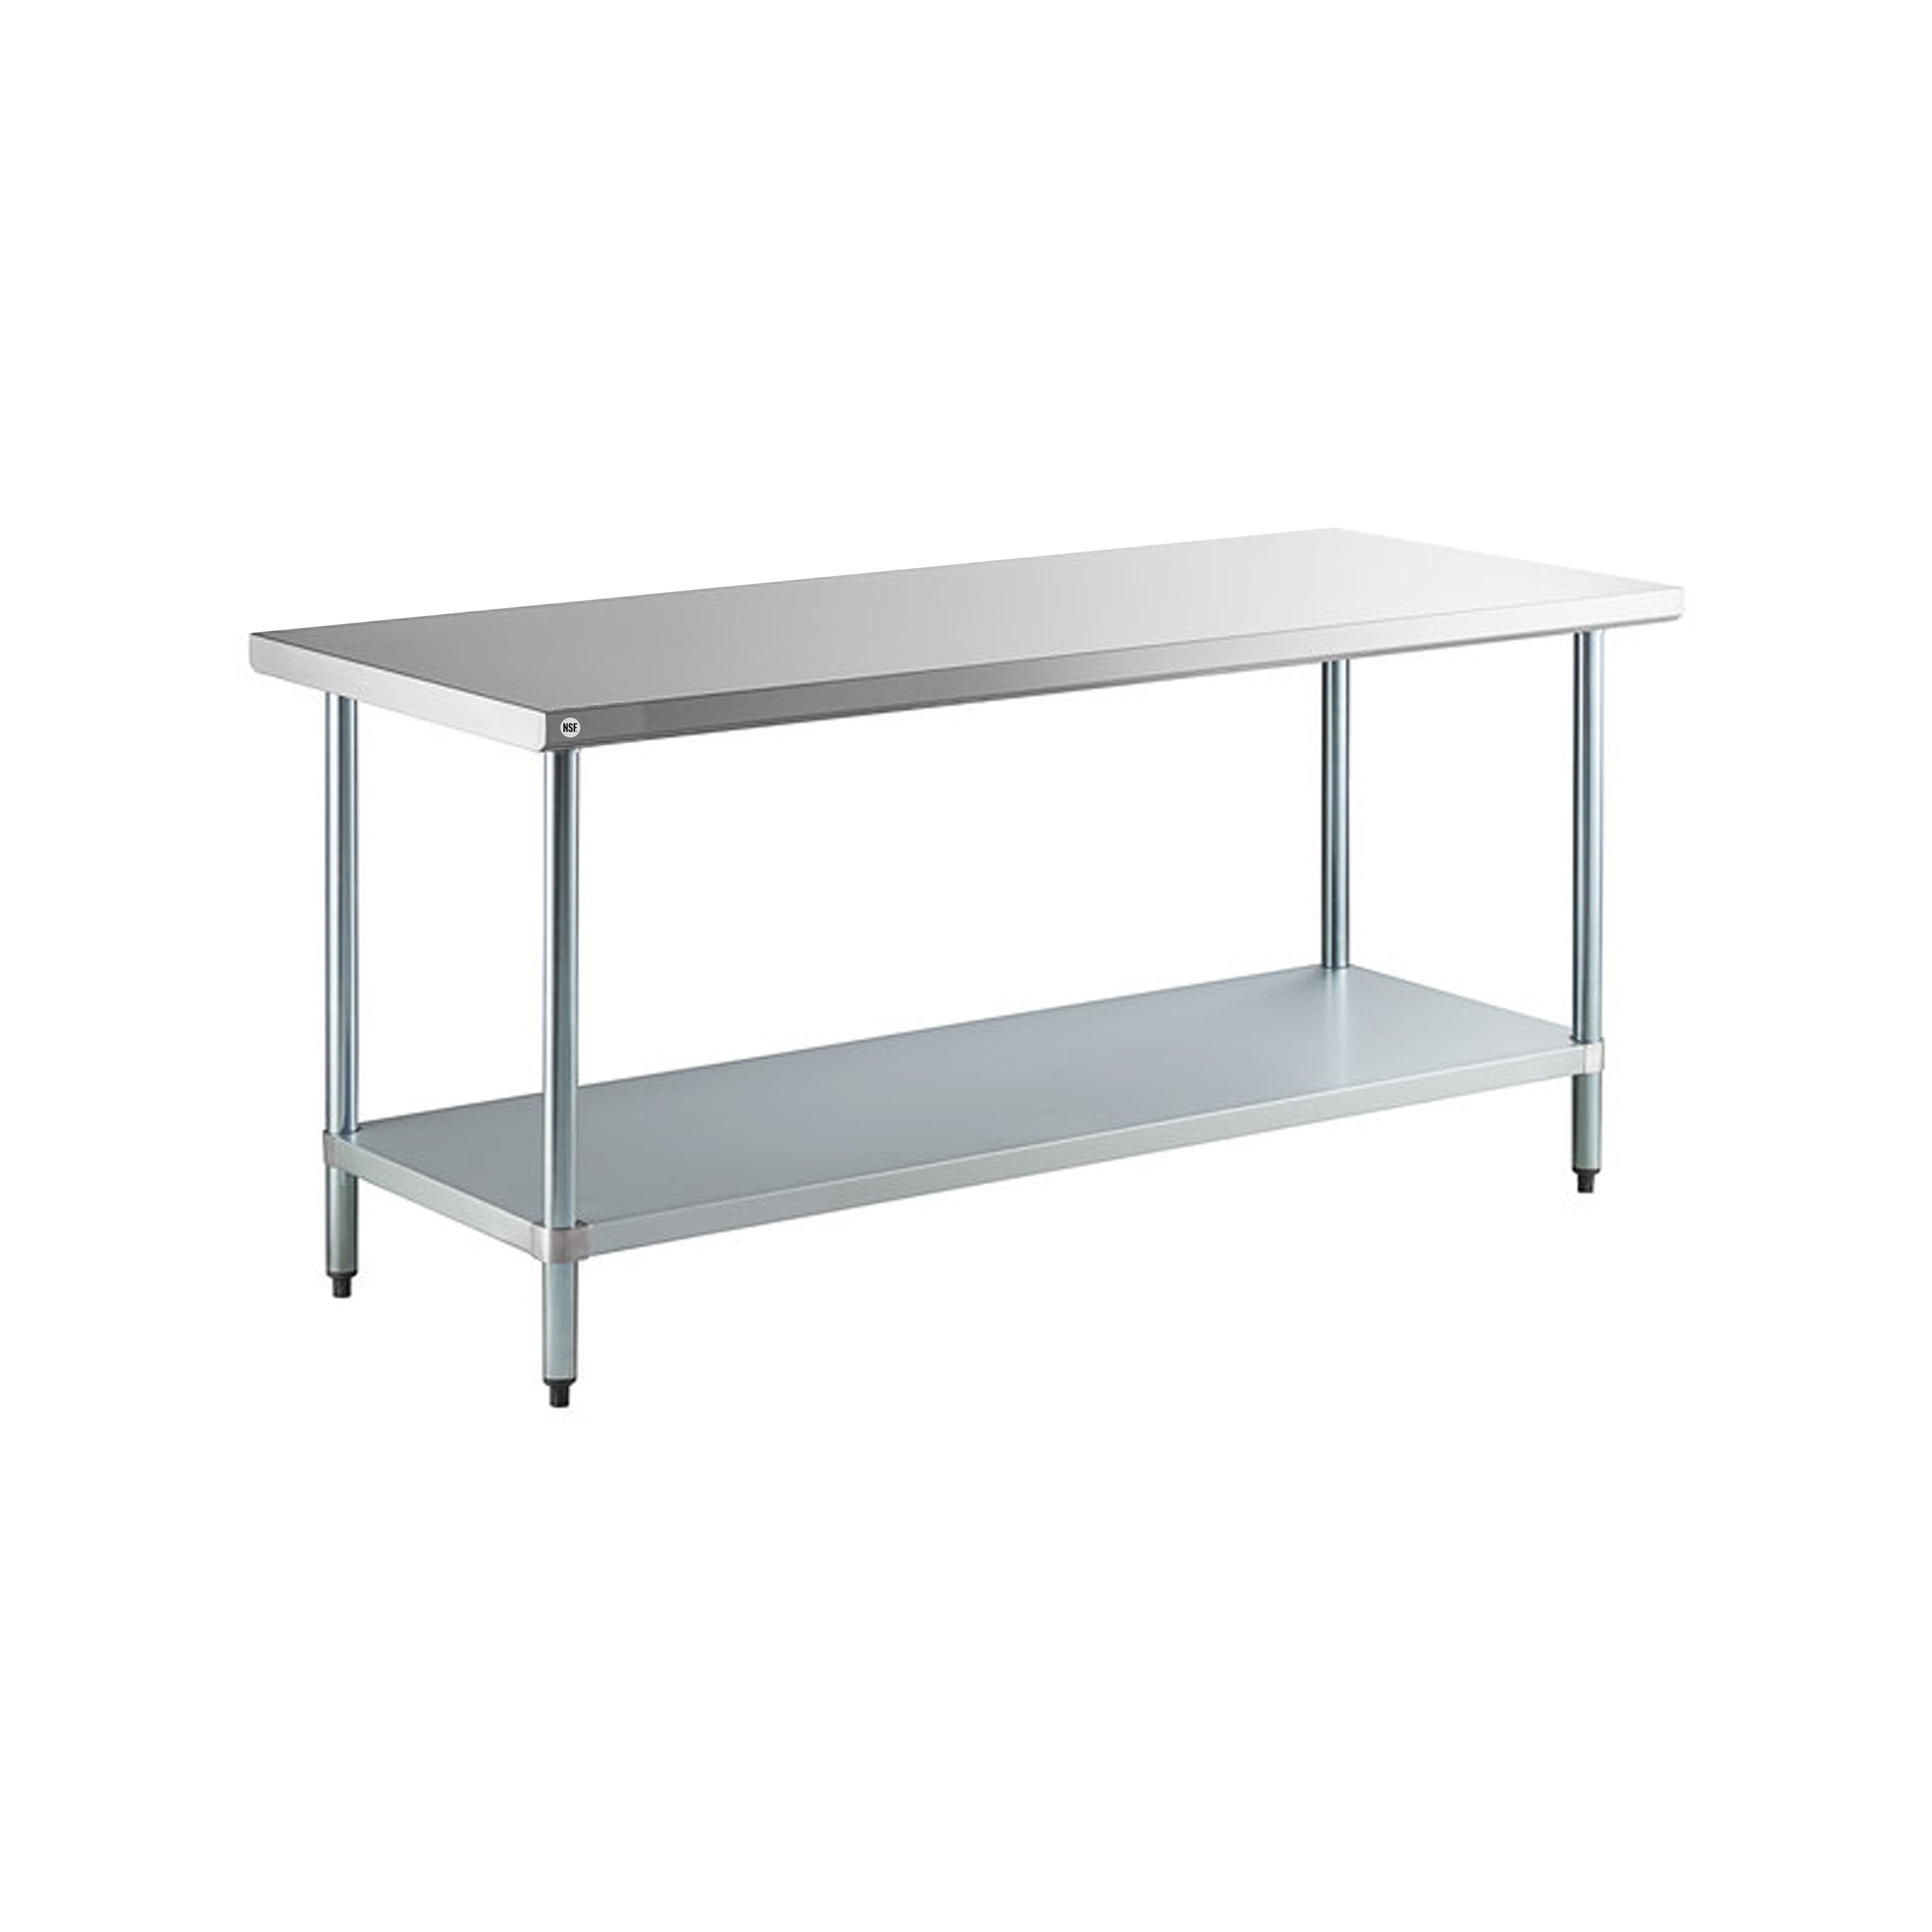 Omcan - 22067, Commercial 24" x 60" Stainless Steel Kitchen Work Table 1100lbs Light Duty